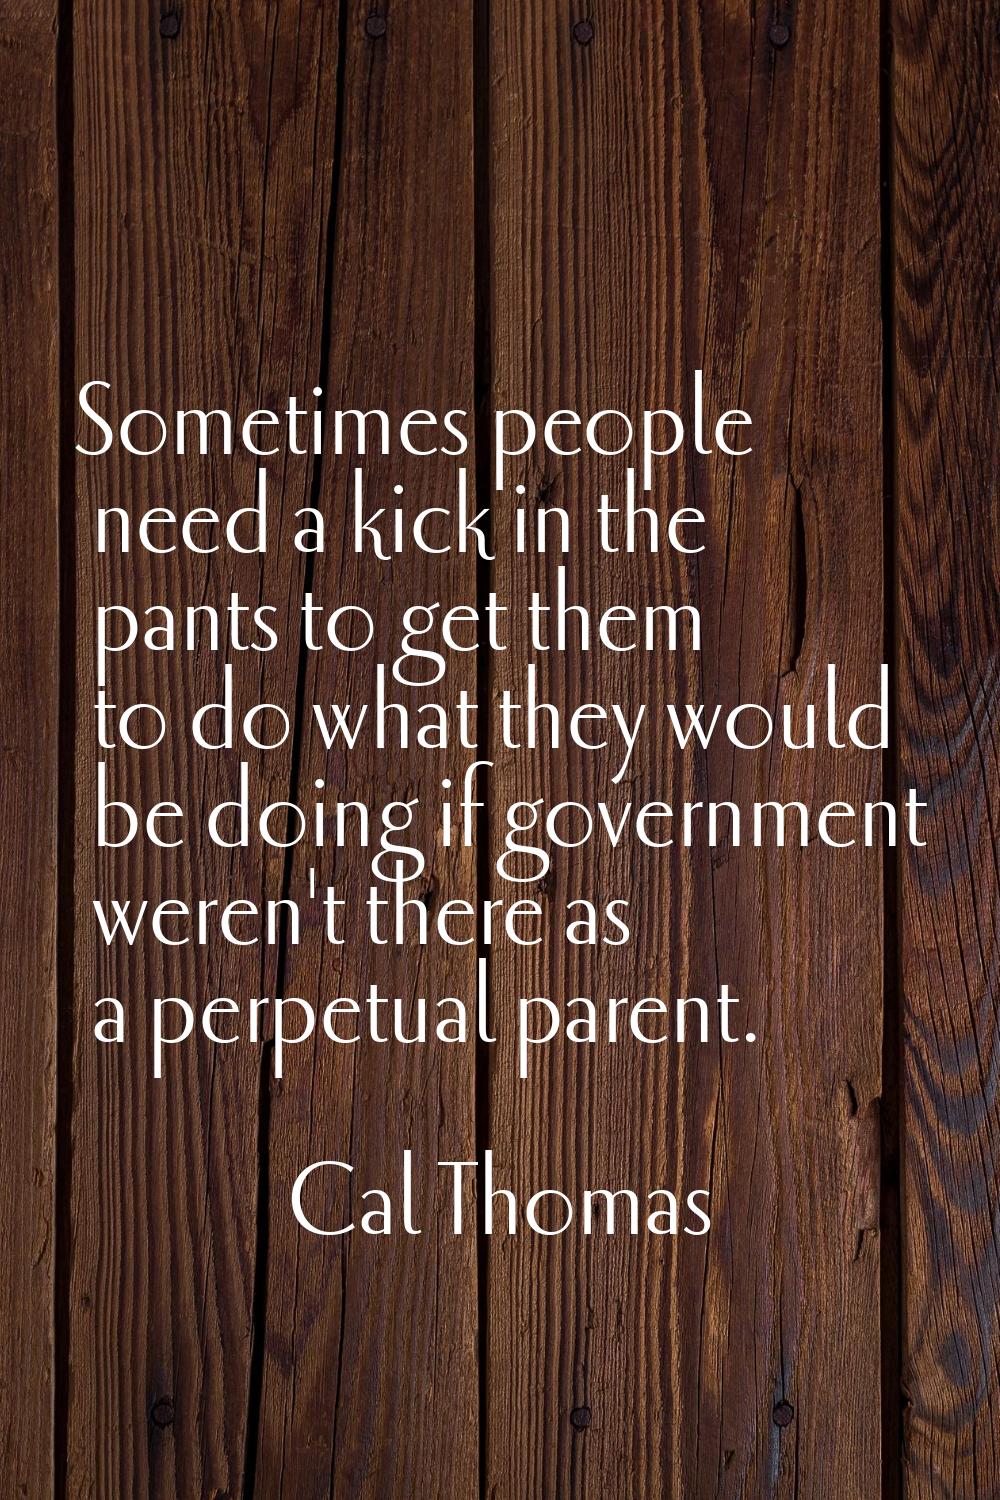 Sometimes people need a kick in the pants to get them to do what they would be doing if government 